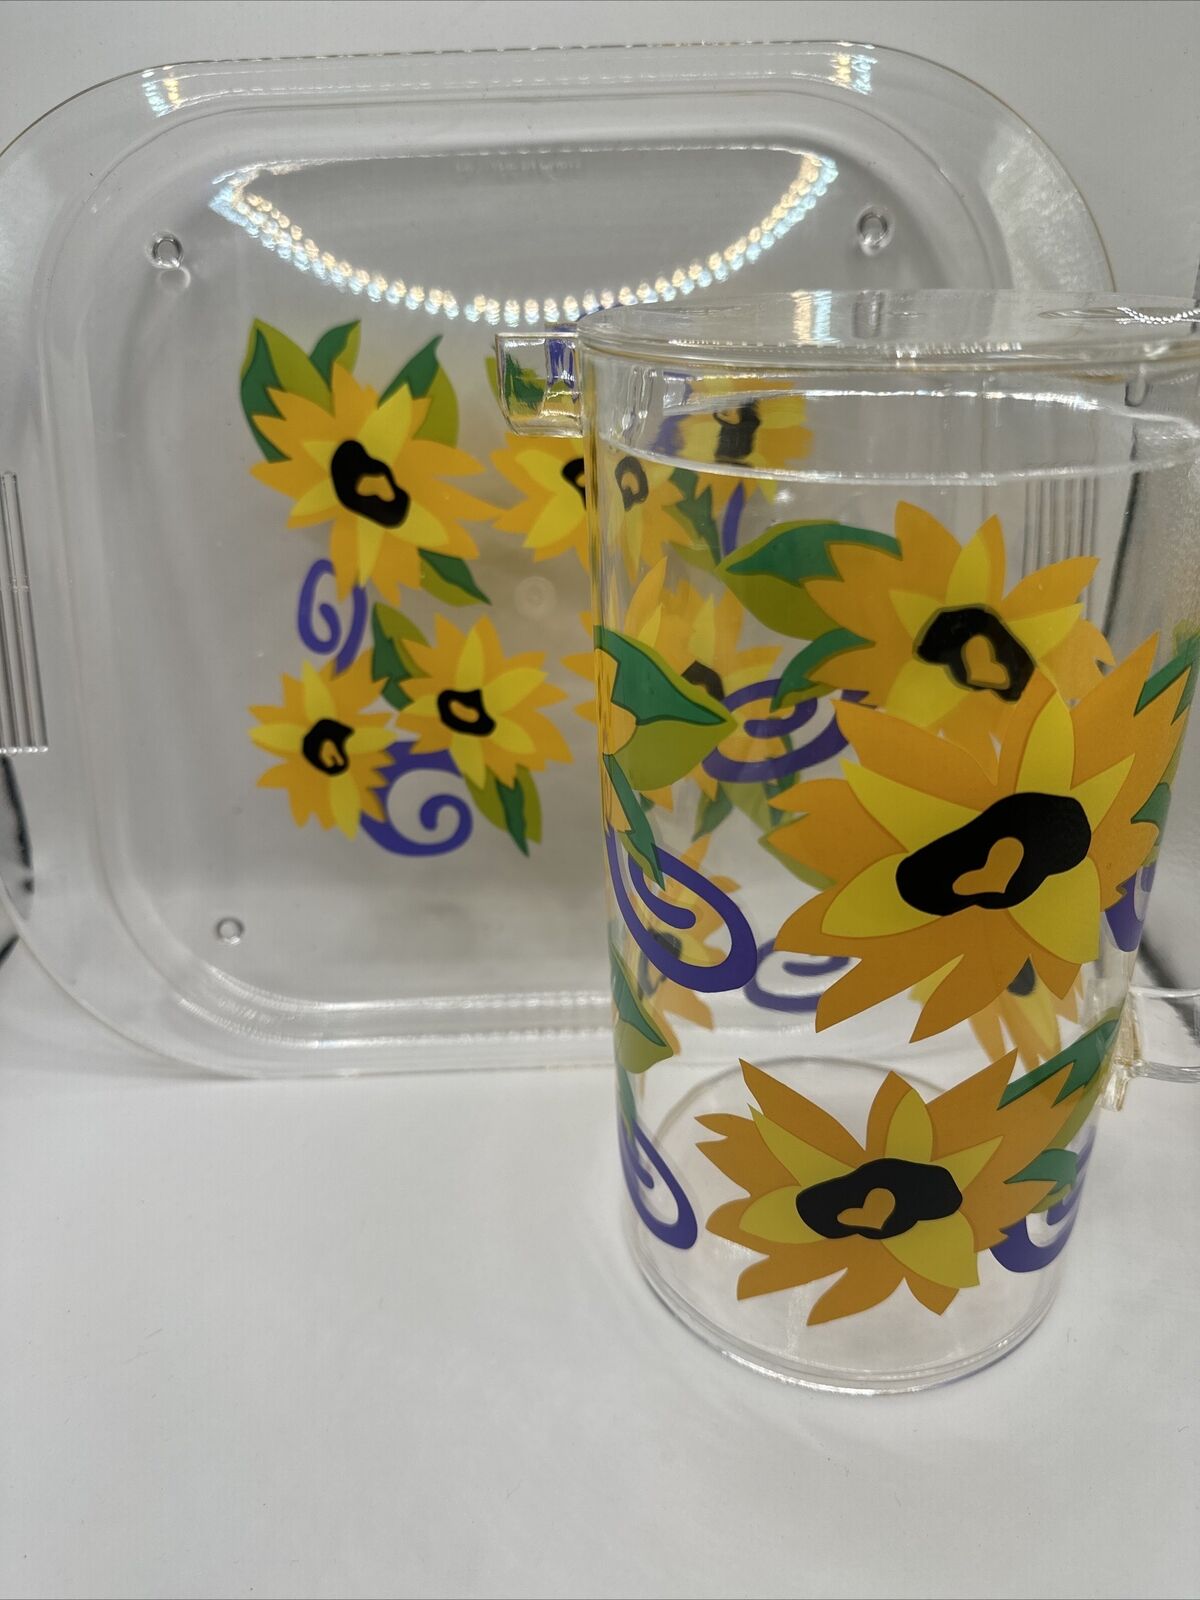 Vintage Acrylic Picnic Pitcher Cup Snd Tray Sun Flowers.